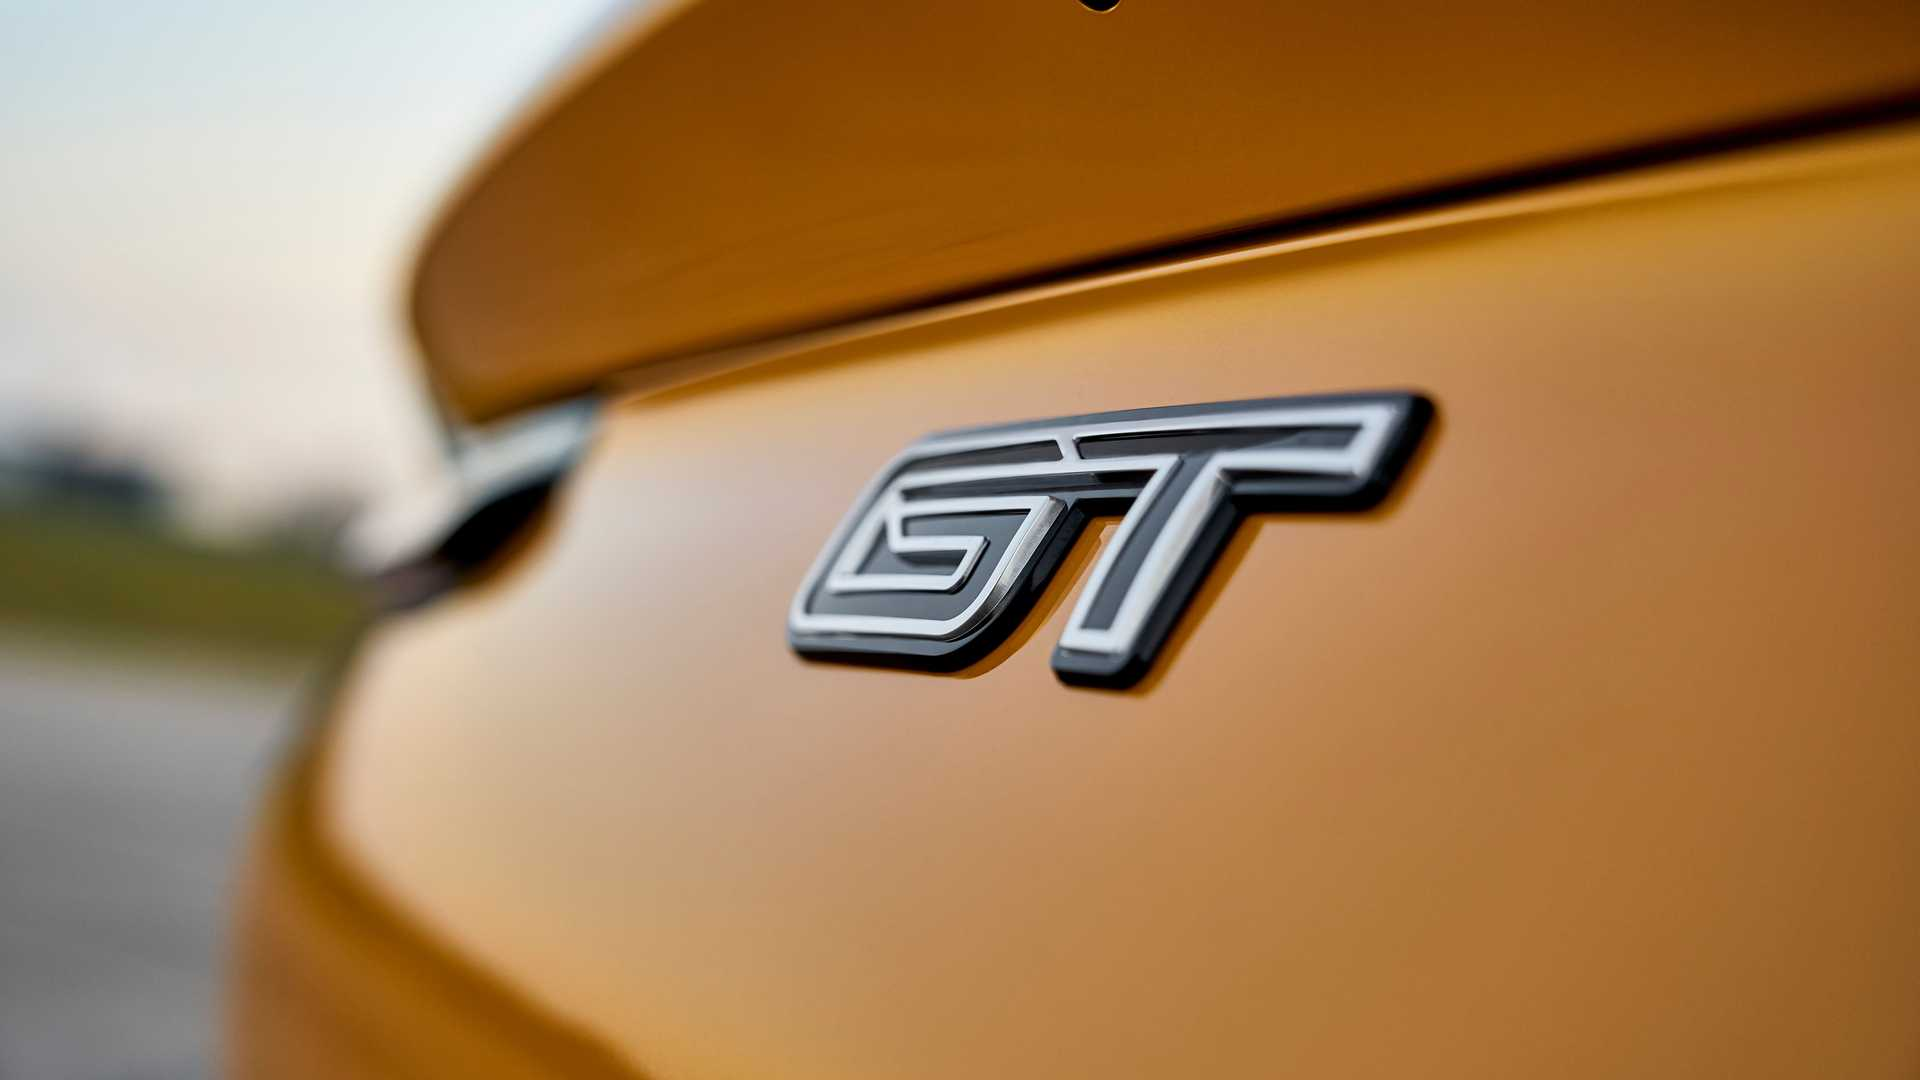 S650 Mustang S650 Mustang GT gets new badge design and loses black trunk trim - revealed in latest Stampede teaser 1662795874584